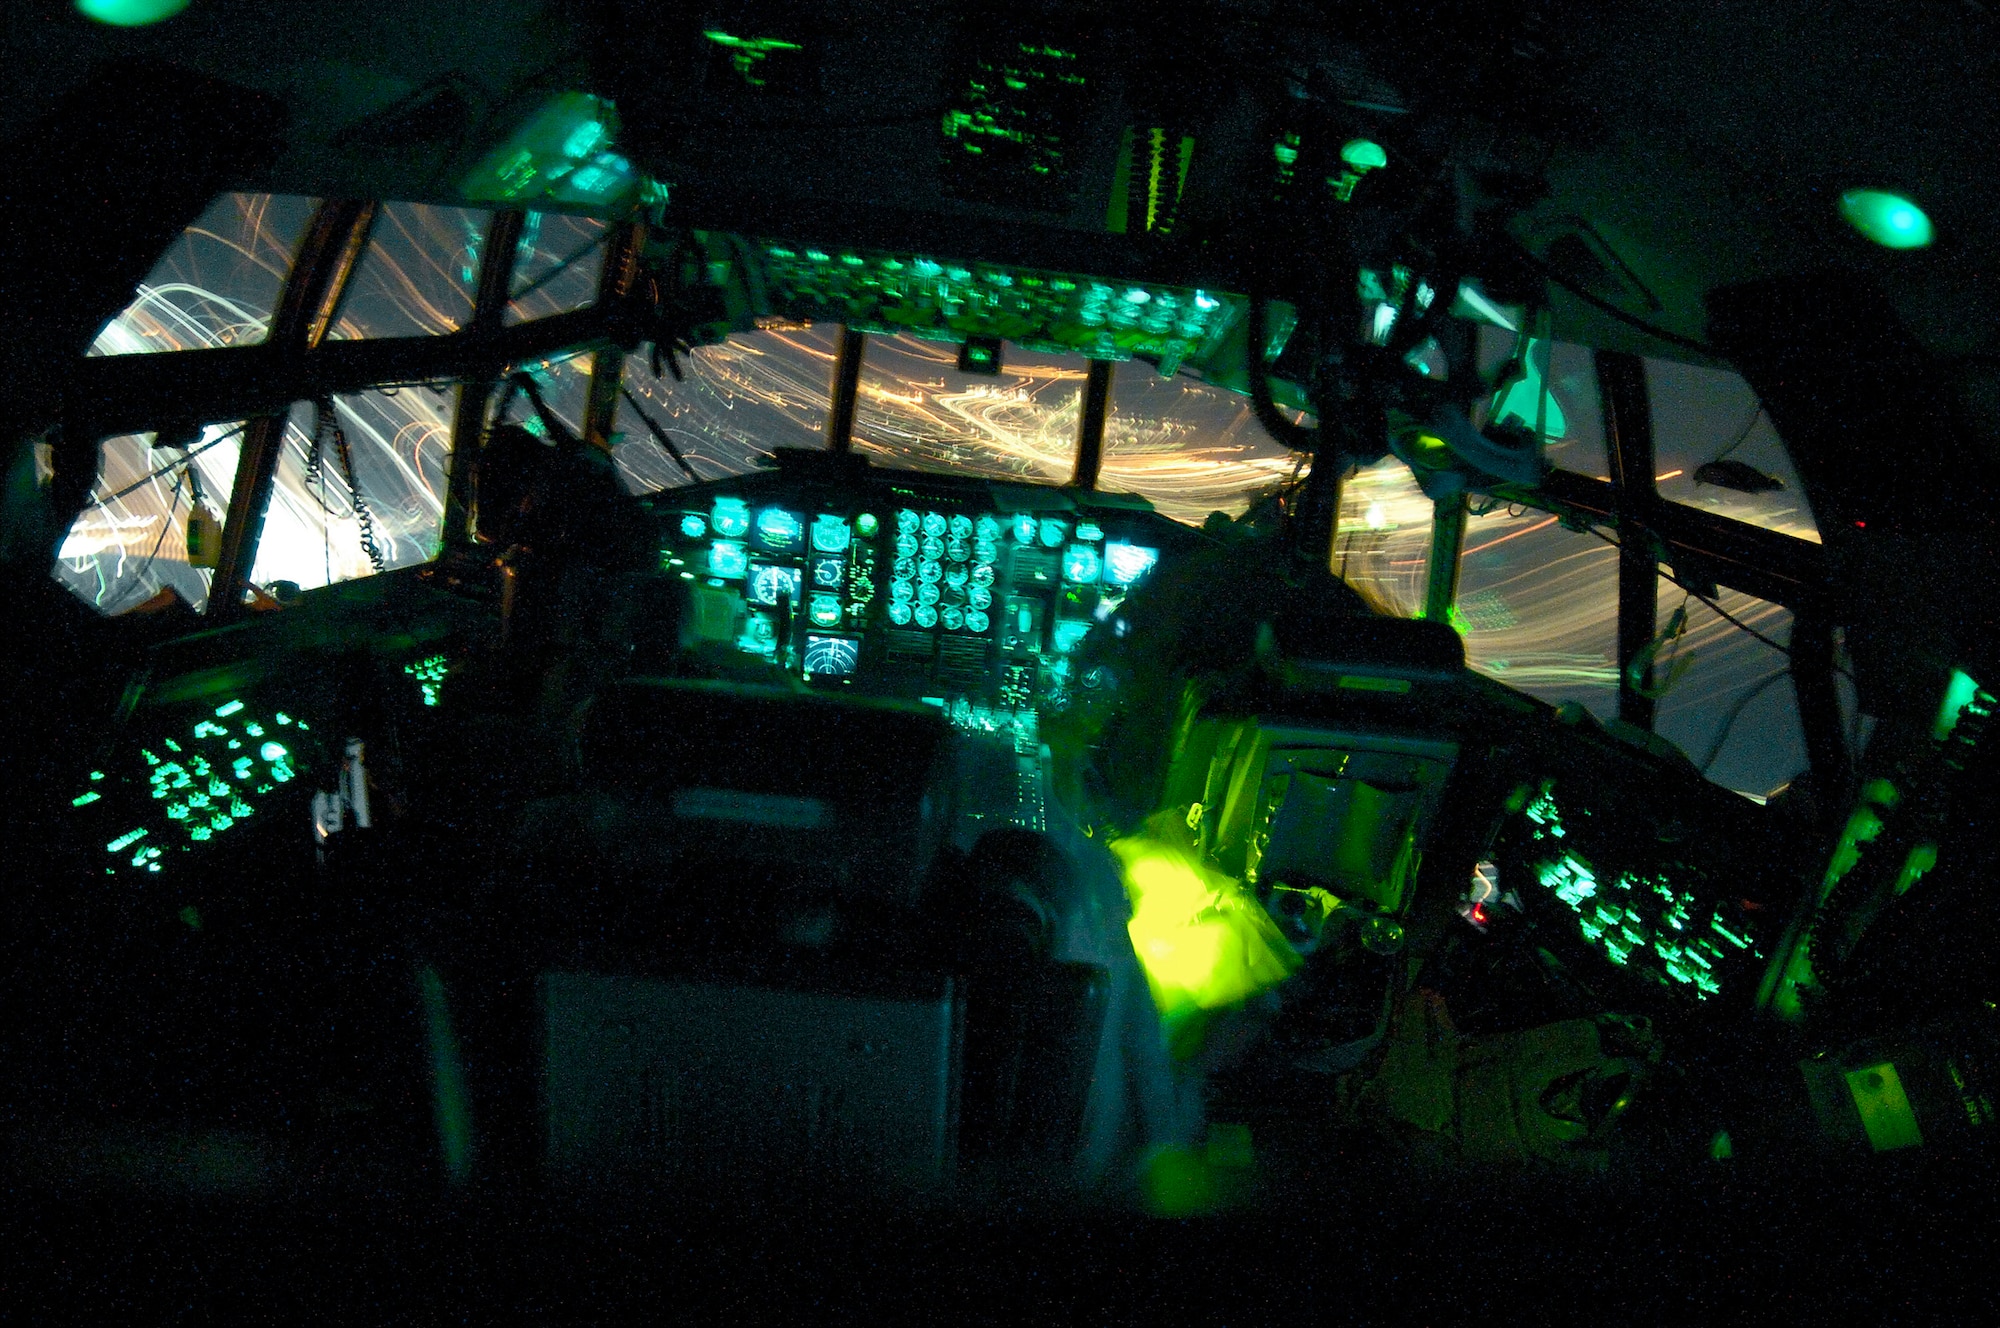 OVER BALAD AIR BASE, Iraq (AFPN) -- In the shadows of their C-130 Hercules' flight deck, (left to right) pilot Maj. Mike Wilson, flight engineer Senior Master Sgt. Ernie Leyba and co-pilot Capt. Tim Pemberton approach for a landing at Balad Air Base. The crew flew a New Year's Eve mission to deliver 13 passengers and 13,000 pounds of cargo -- landing at Balad in 2006. Members of the Air Force Reserve Command's 731st Airlift Squadron, the crew is ending a Southwest Asia tour with the 746th Expeditionary Airlift Squadron. (U.S. Air Force photo by Master Sgt. Lance Cheung)